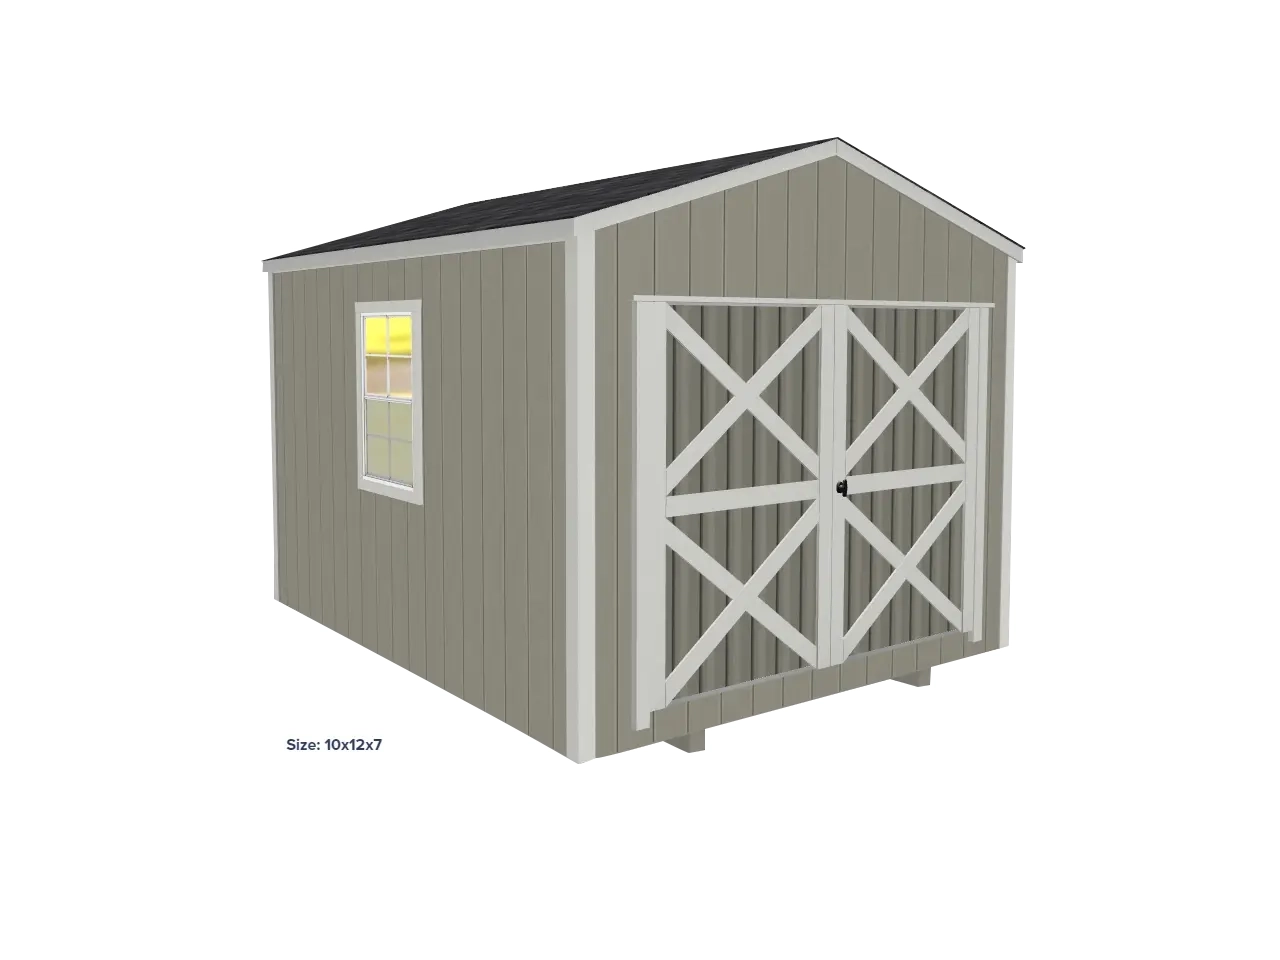 Quality utility shed for your backyard with double doors and two windows.